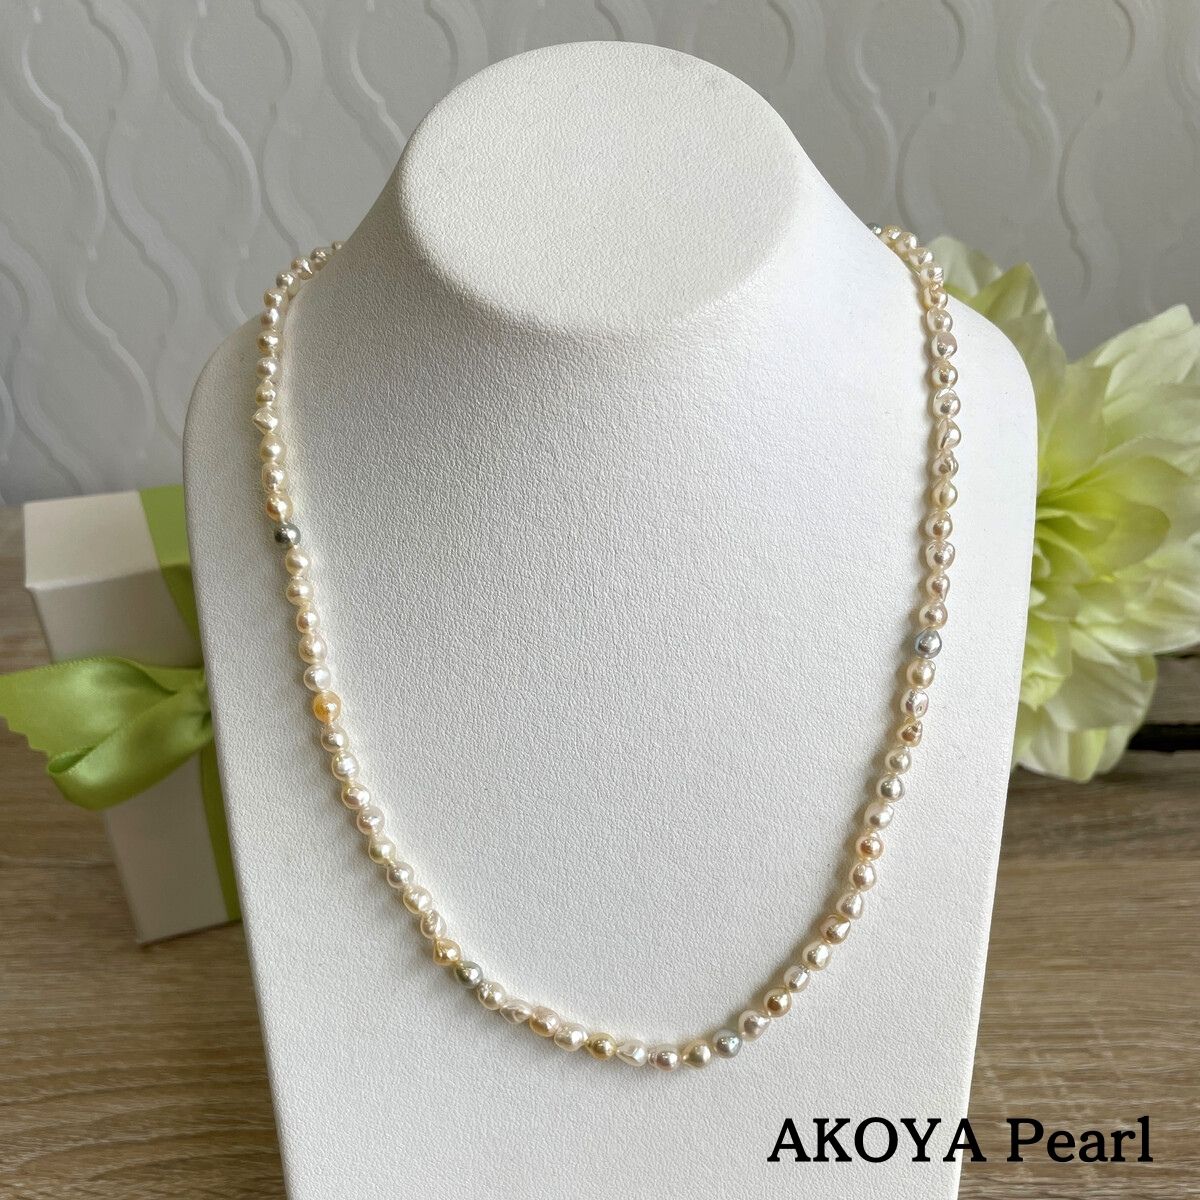 [AKOYA pearl] K18 babypearl necklace appropximately 40cm es-016